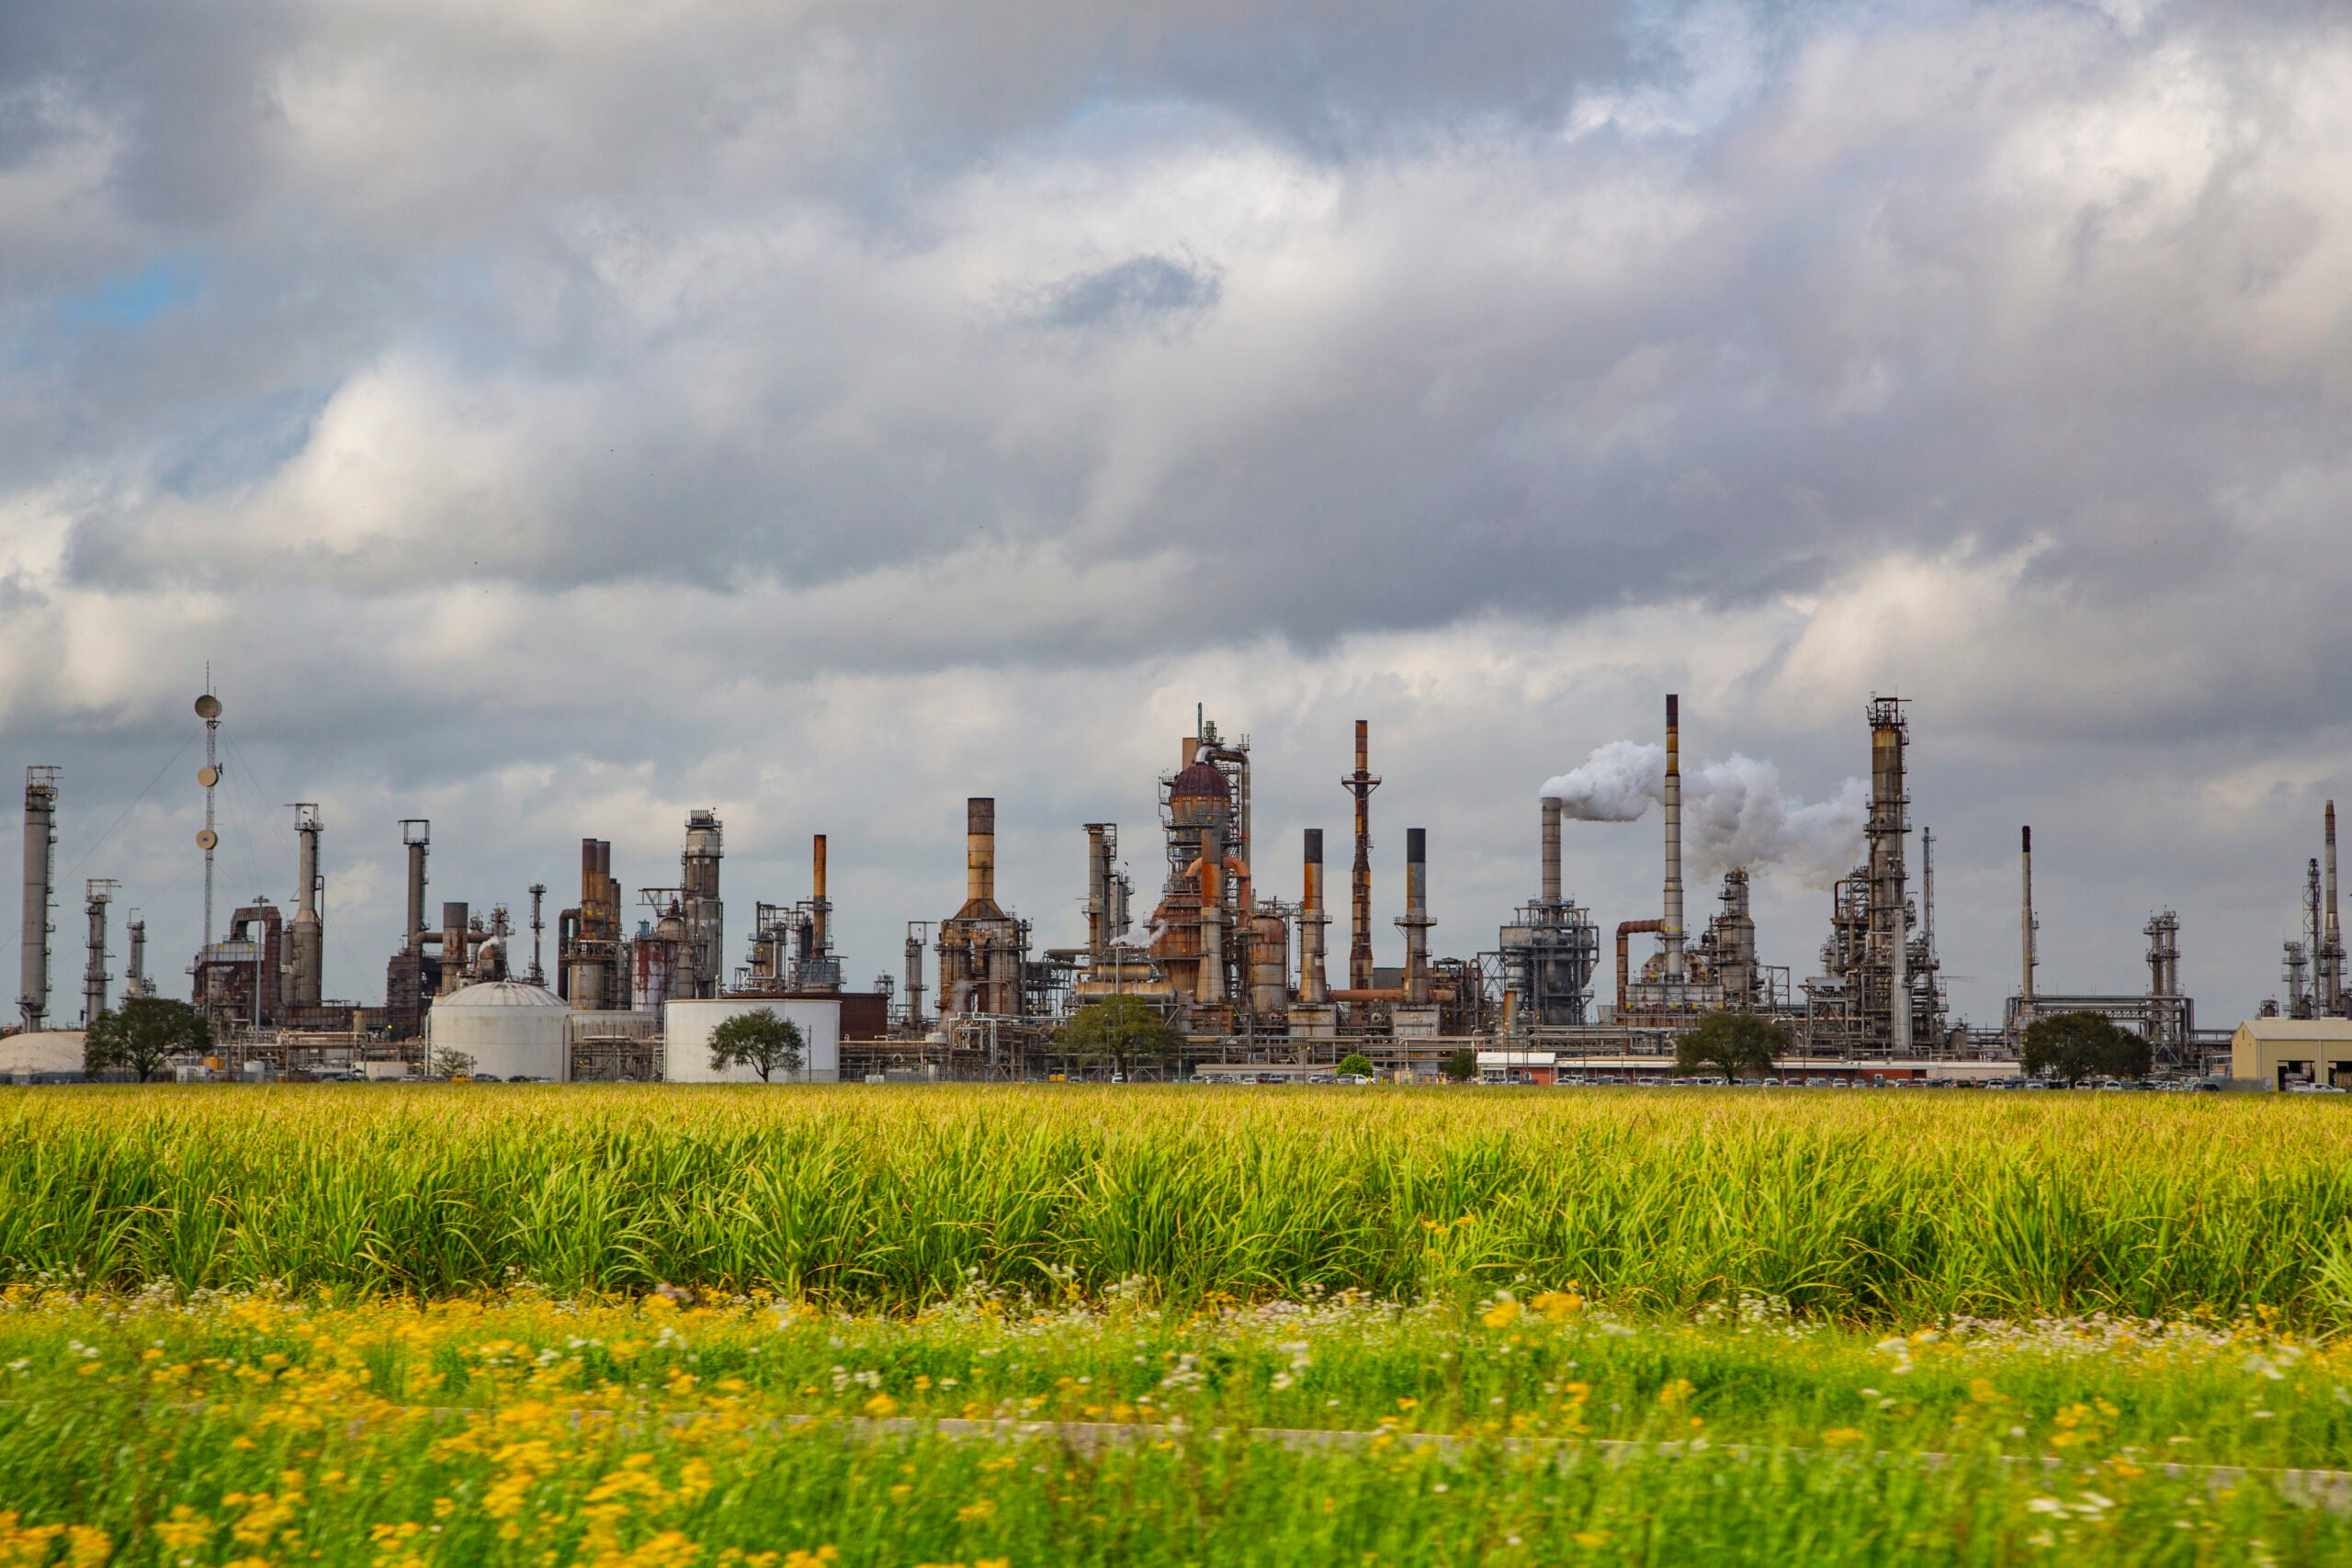 View of industrial chemical complex in St James, Louisiana